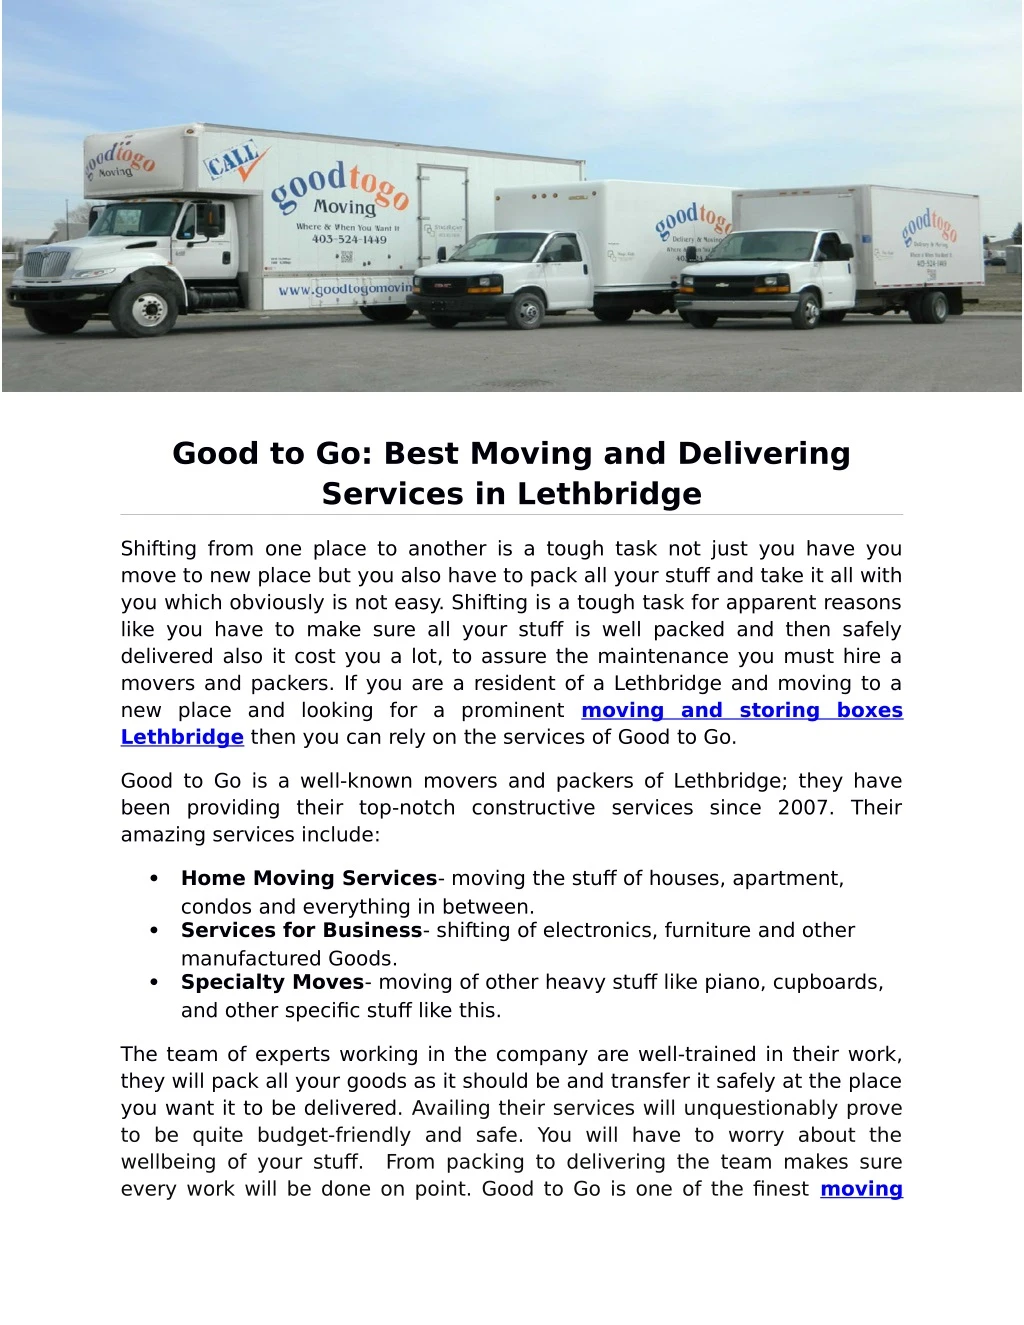 good to go best moving and delivering services